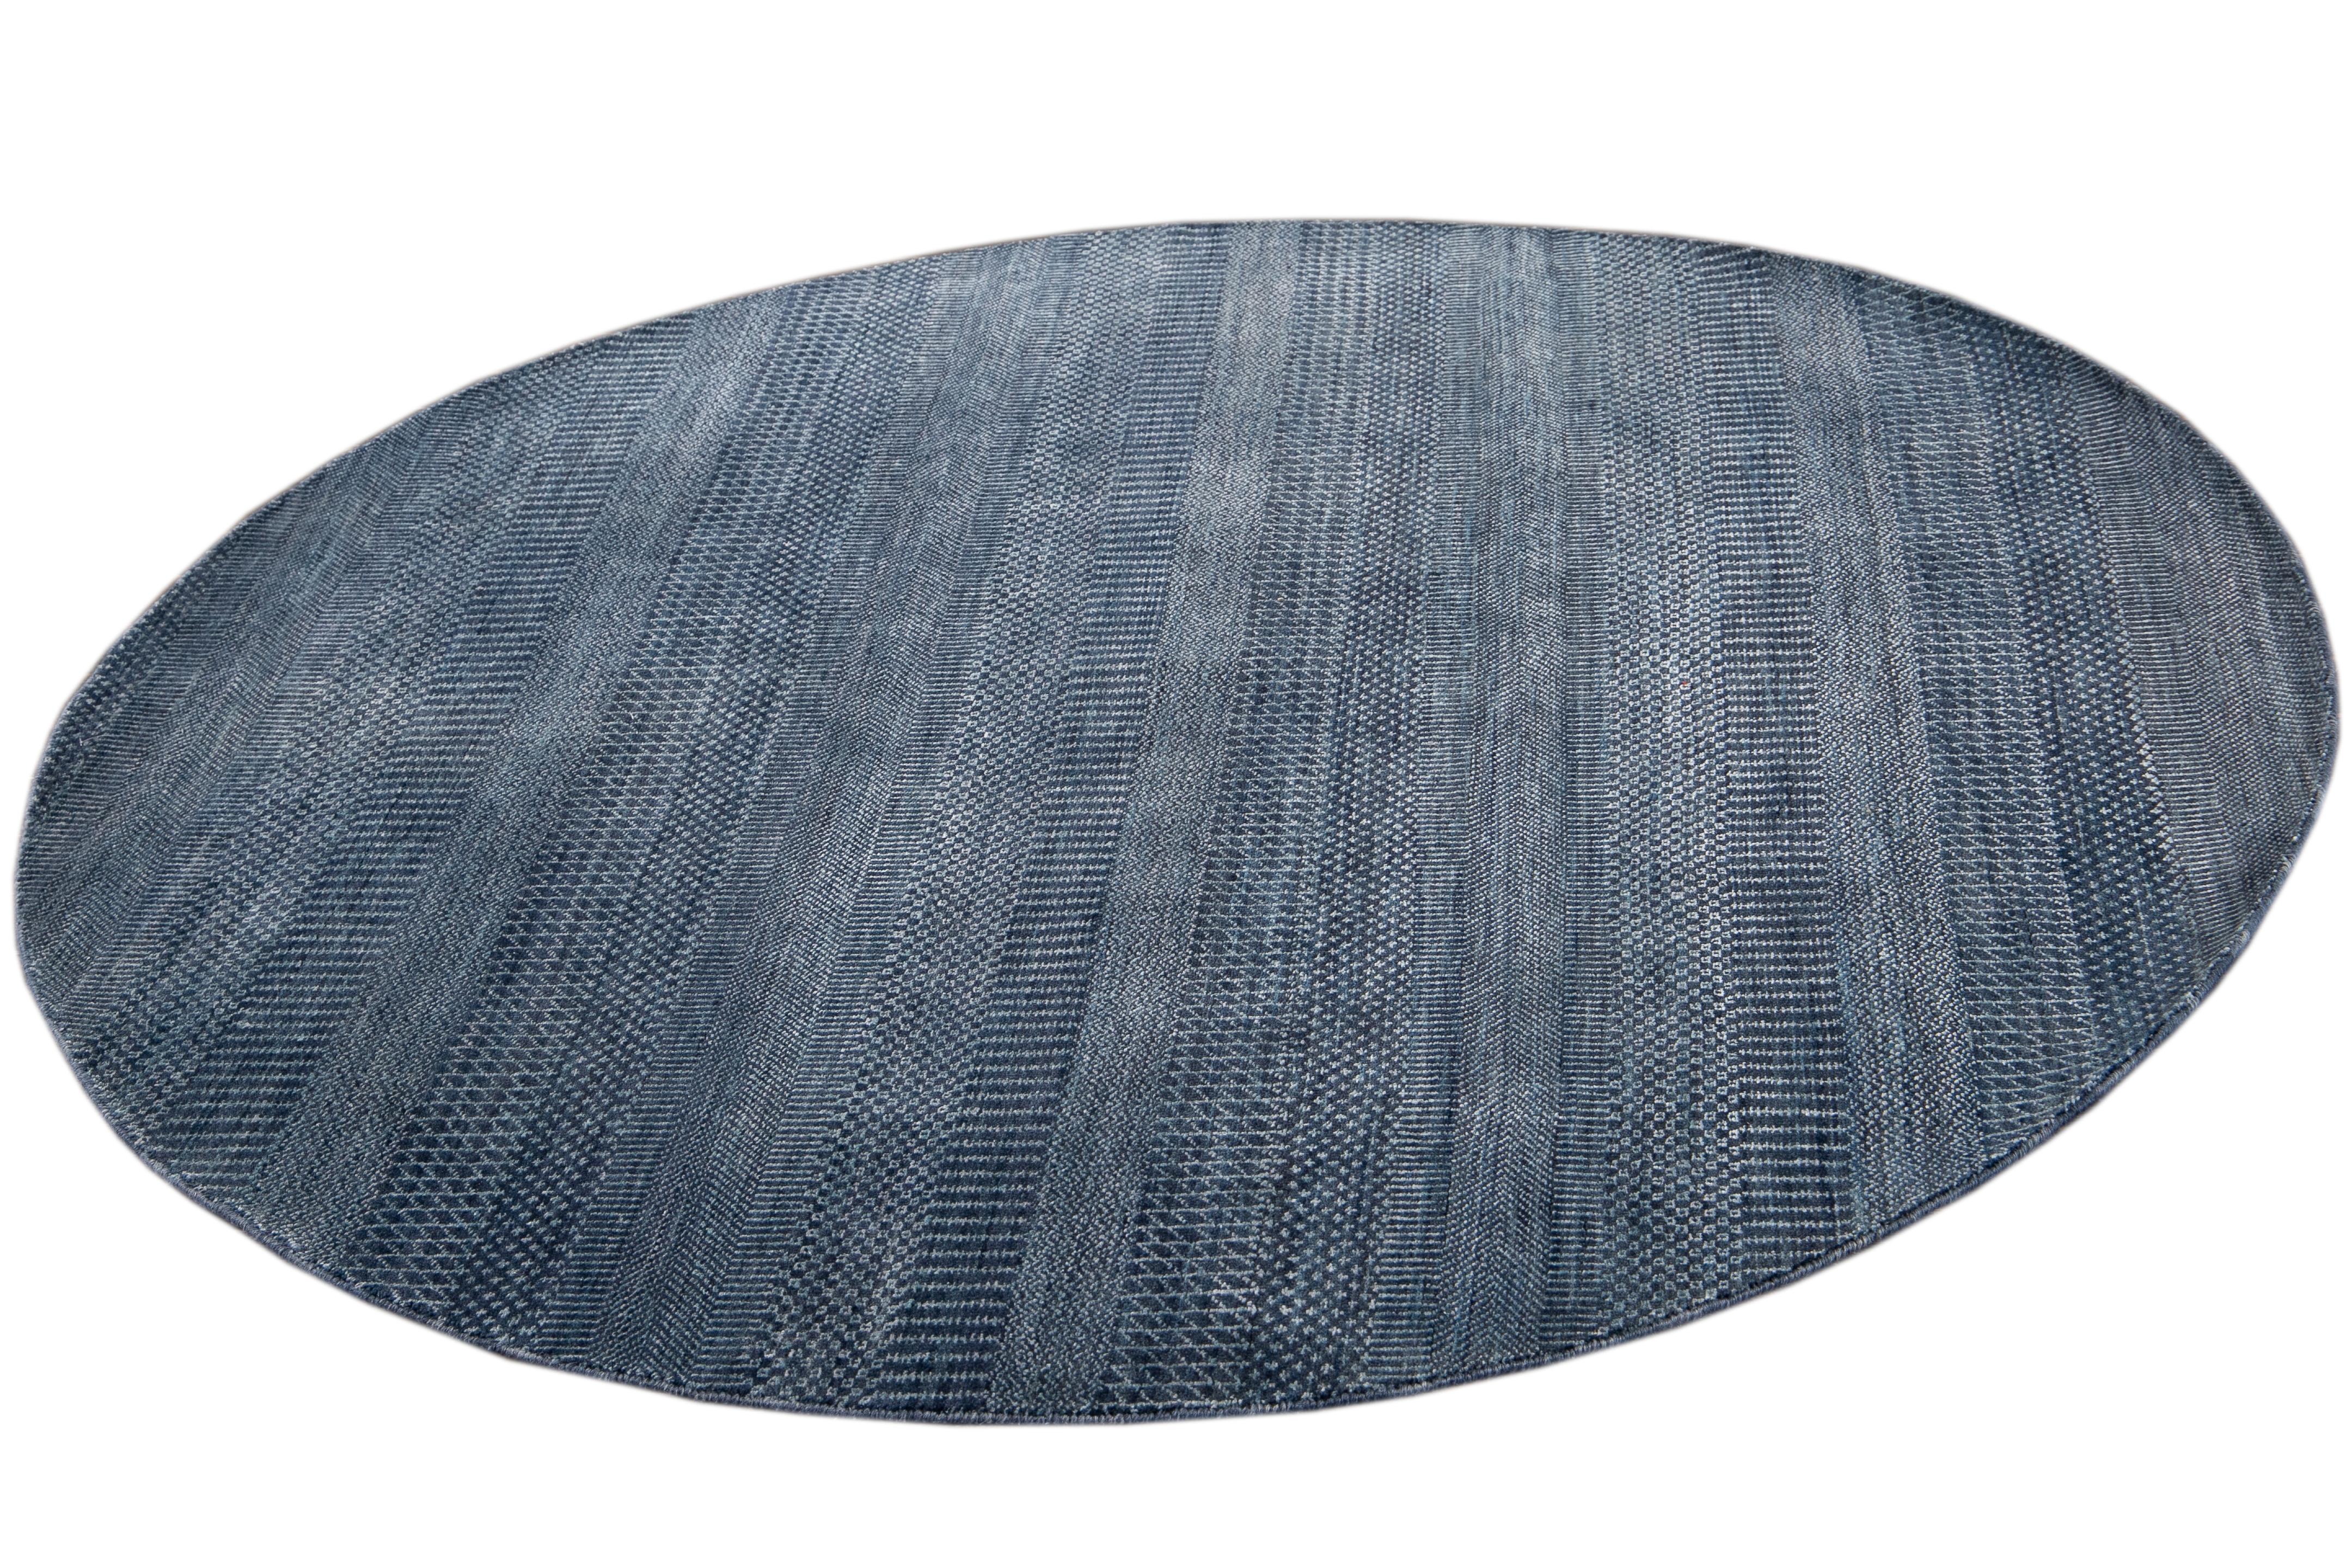 Beautiful contemporary Savannah round rug, hand knotted wool with a dark blue field in an all-over striped design.
This rug has a diameter of 5' 10